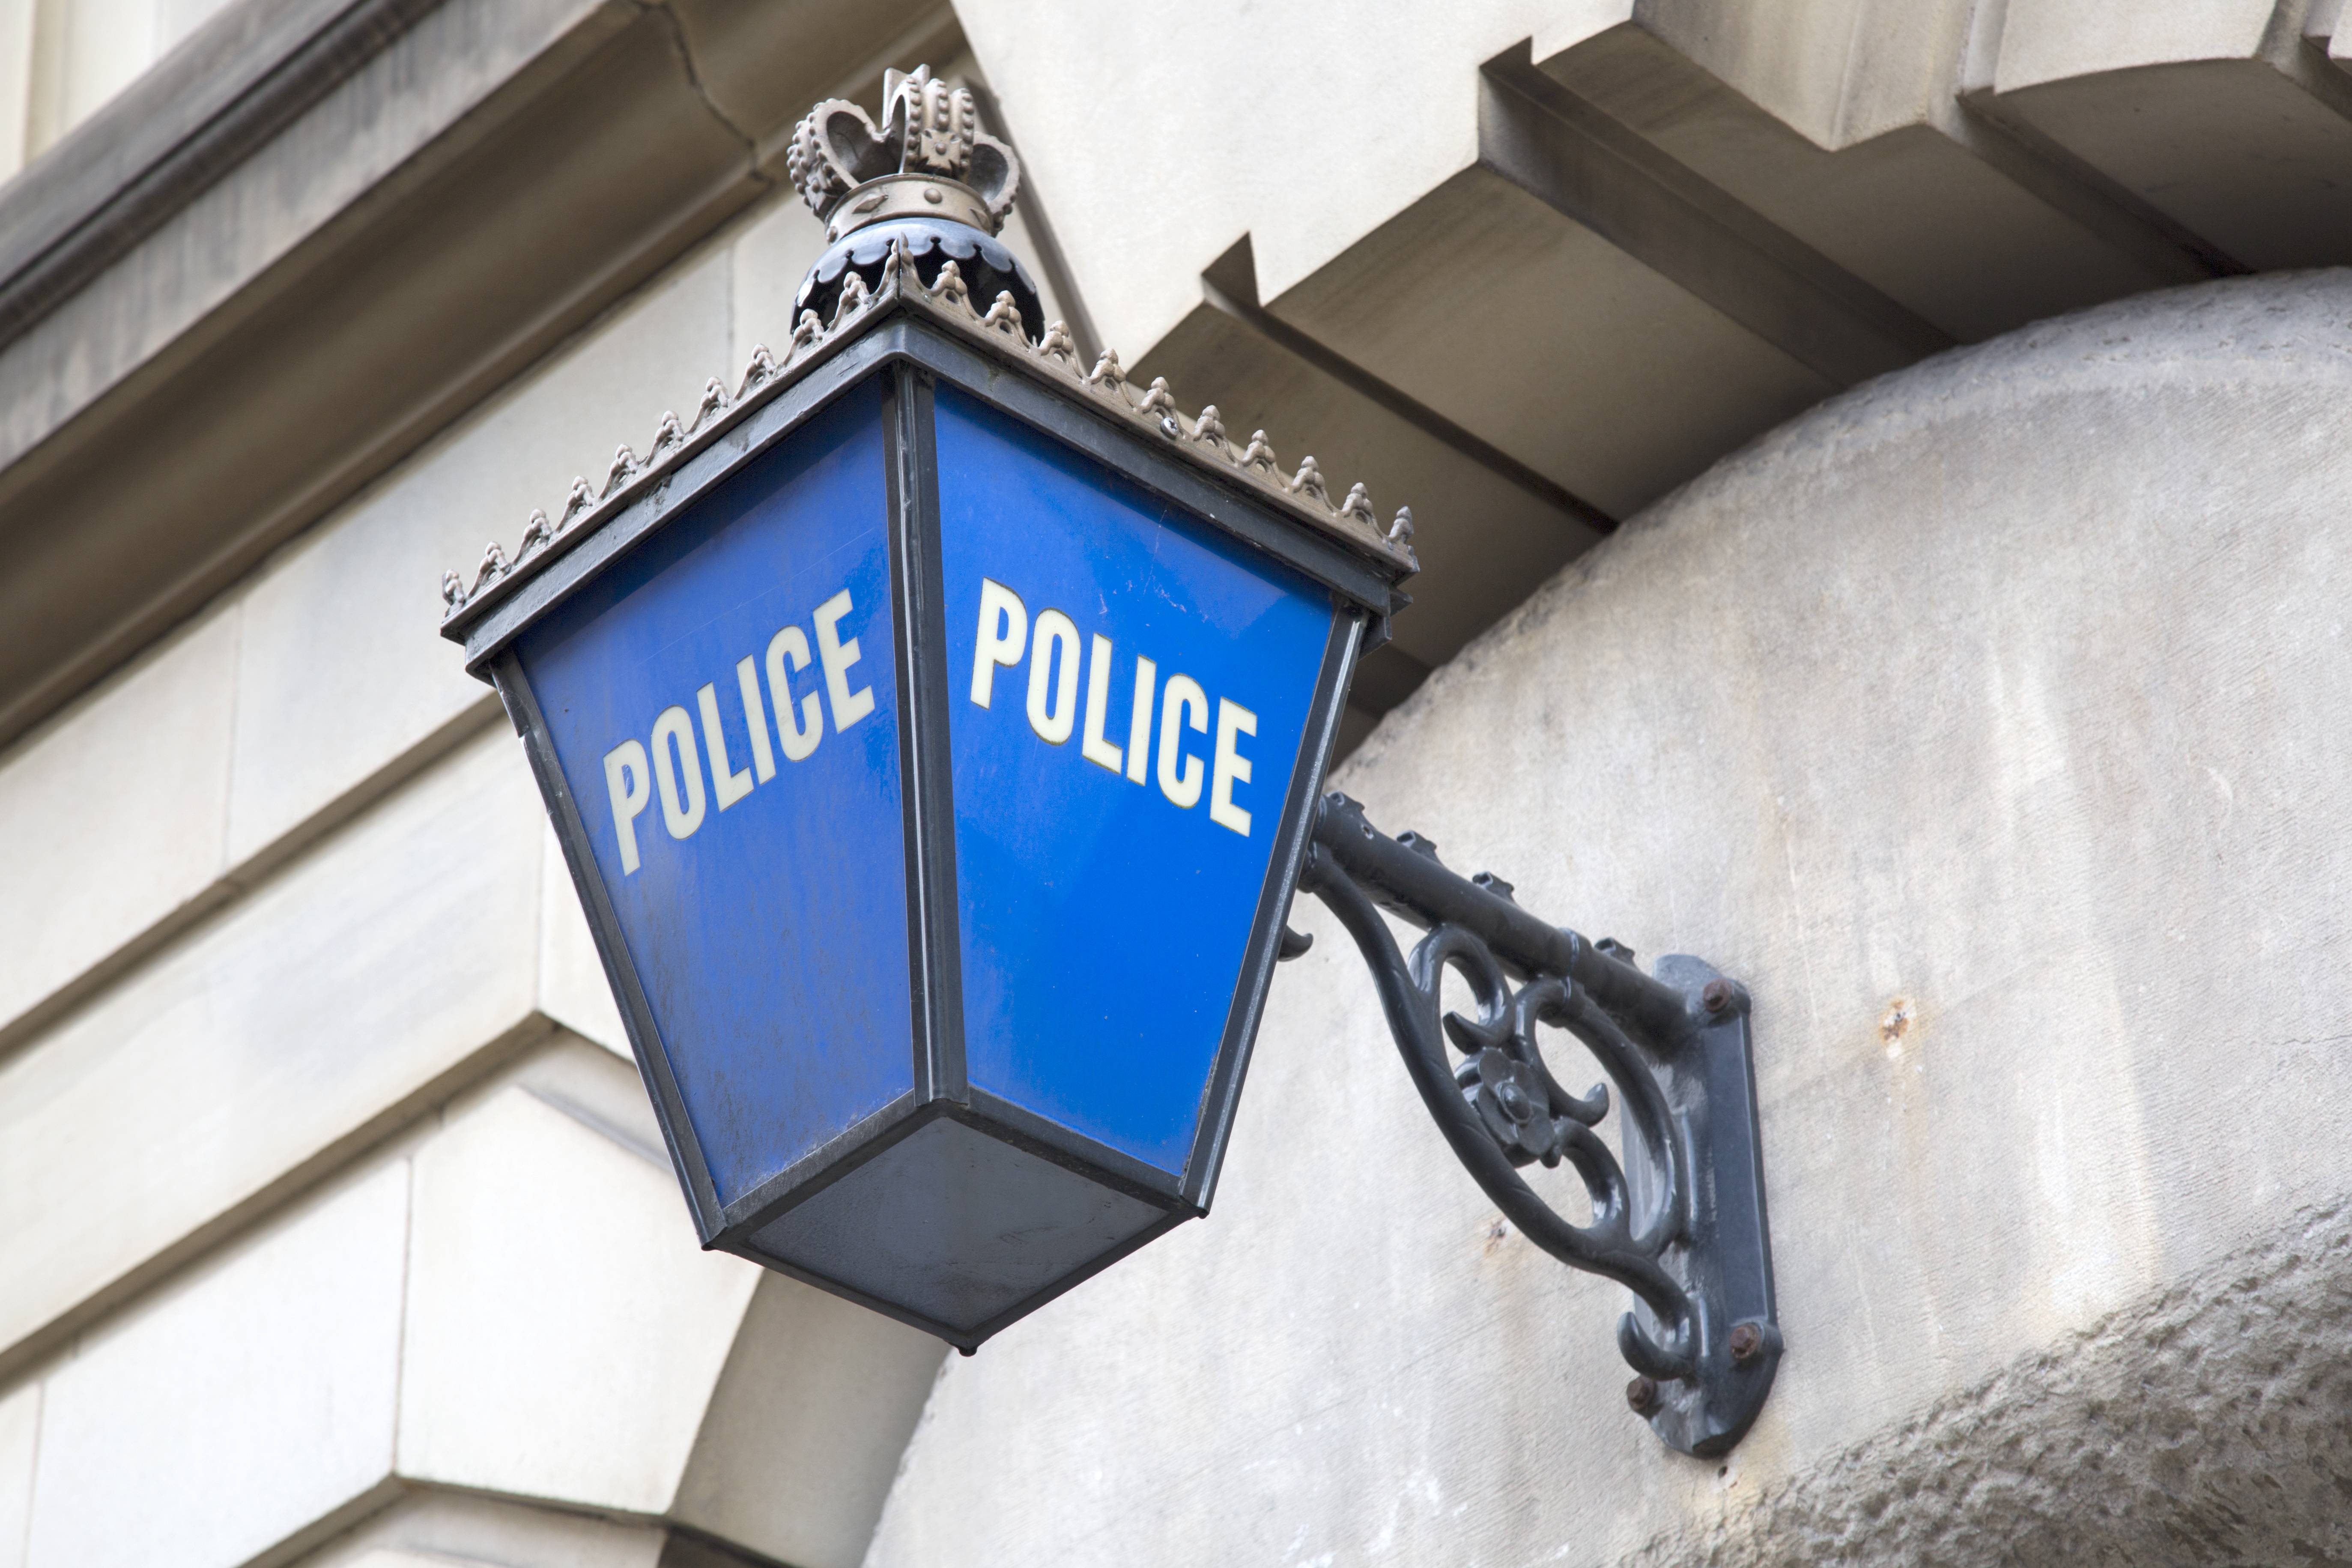 Police Station Sign. | Source: Shutterstock